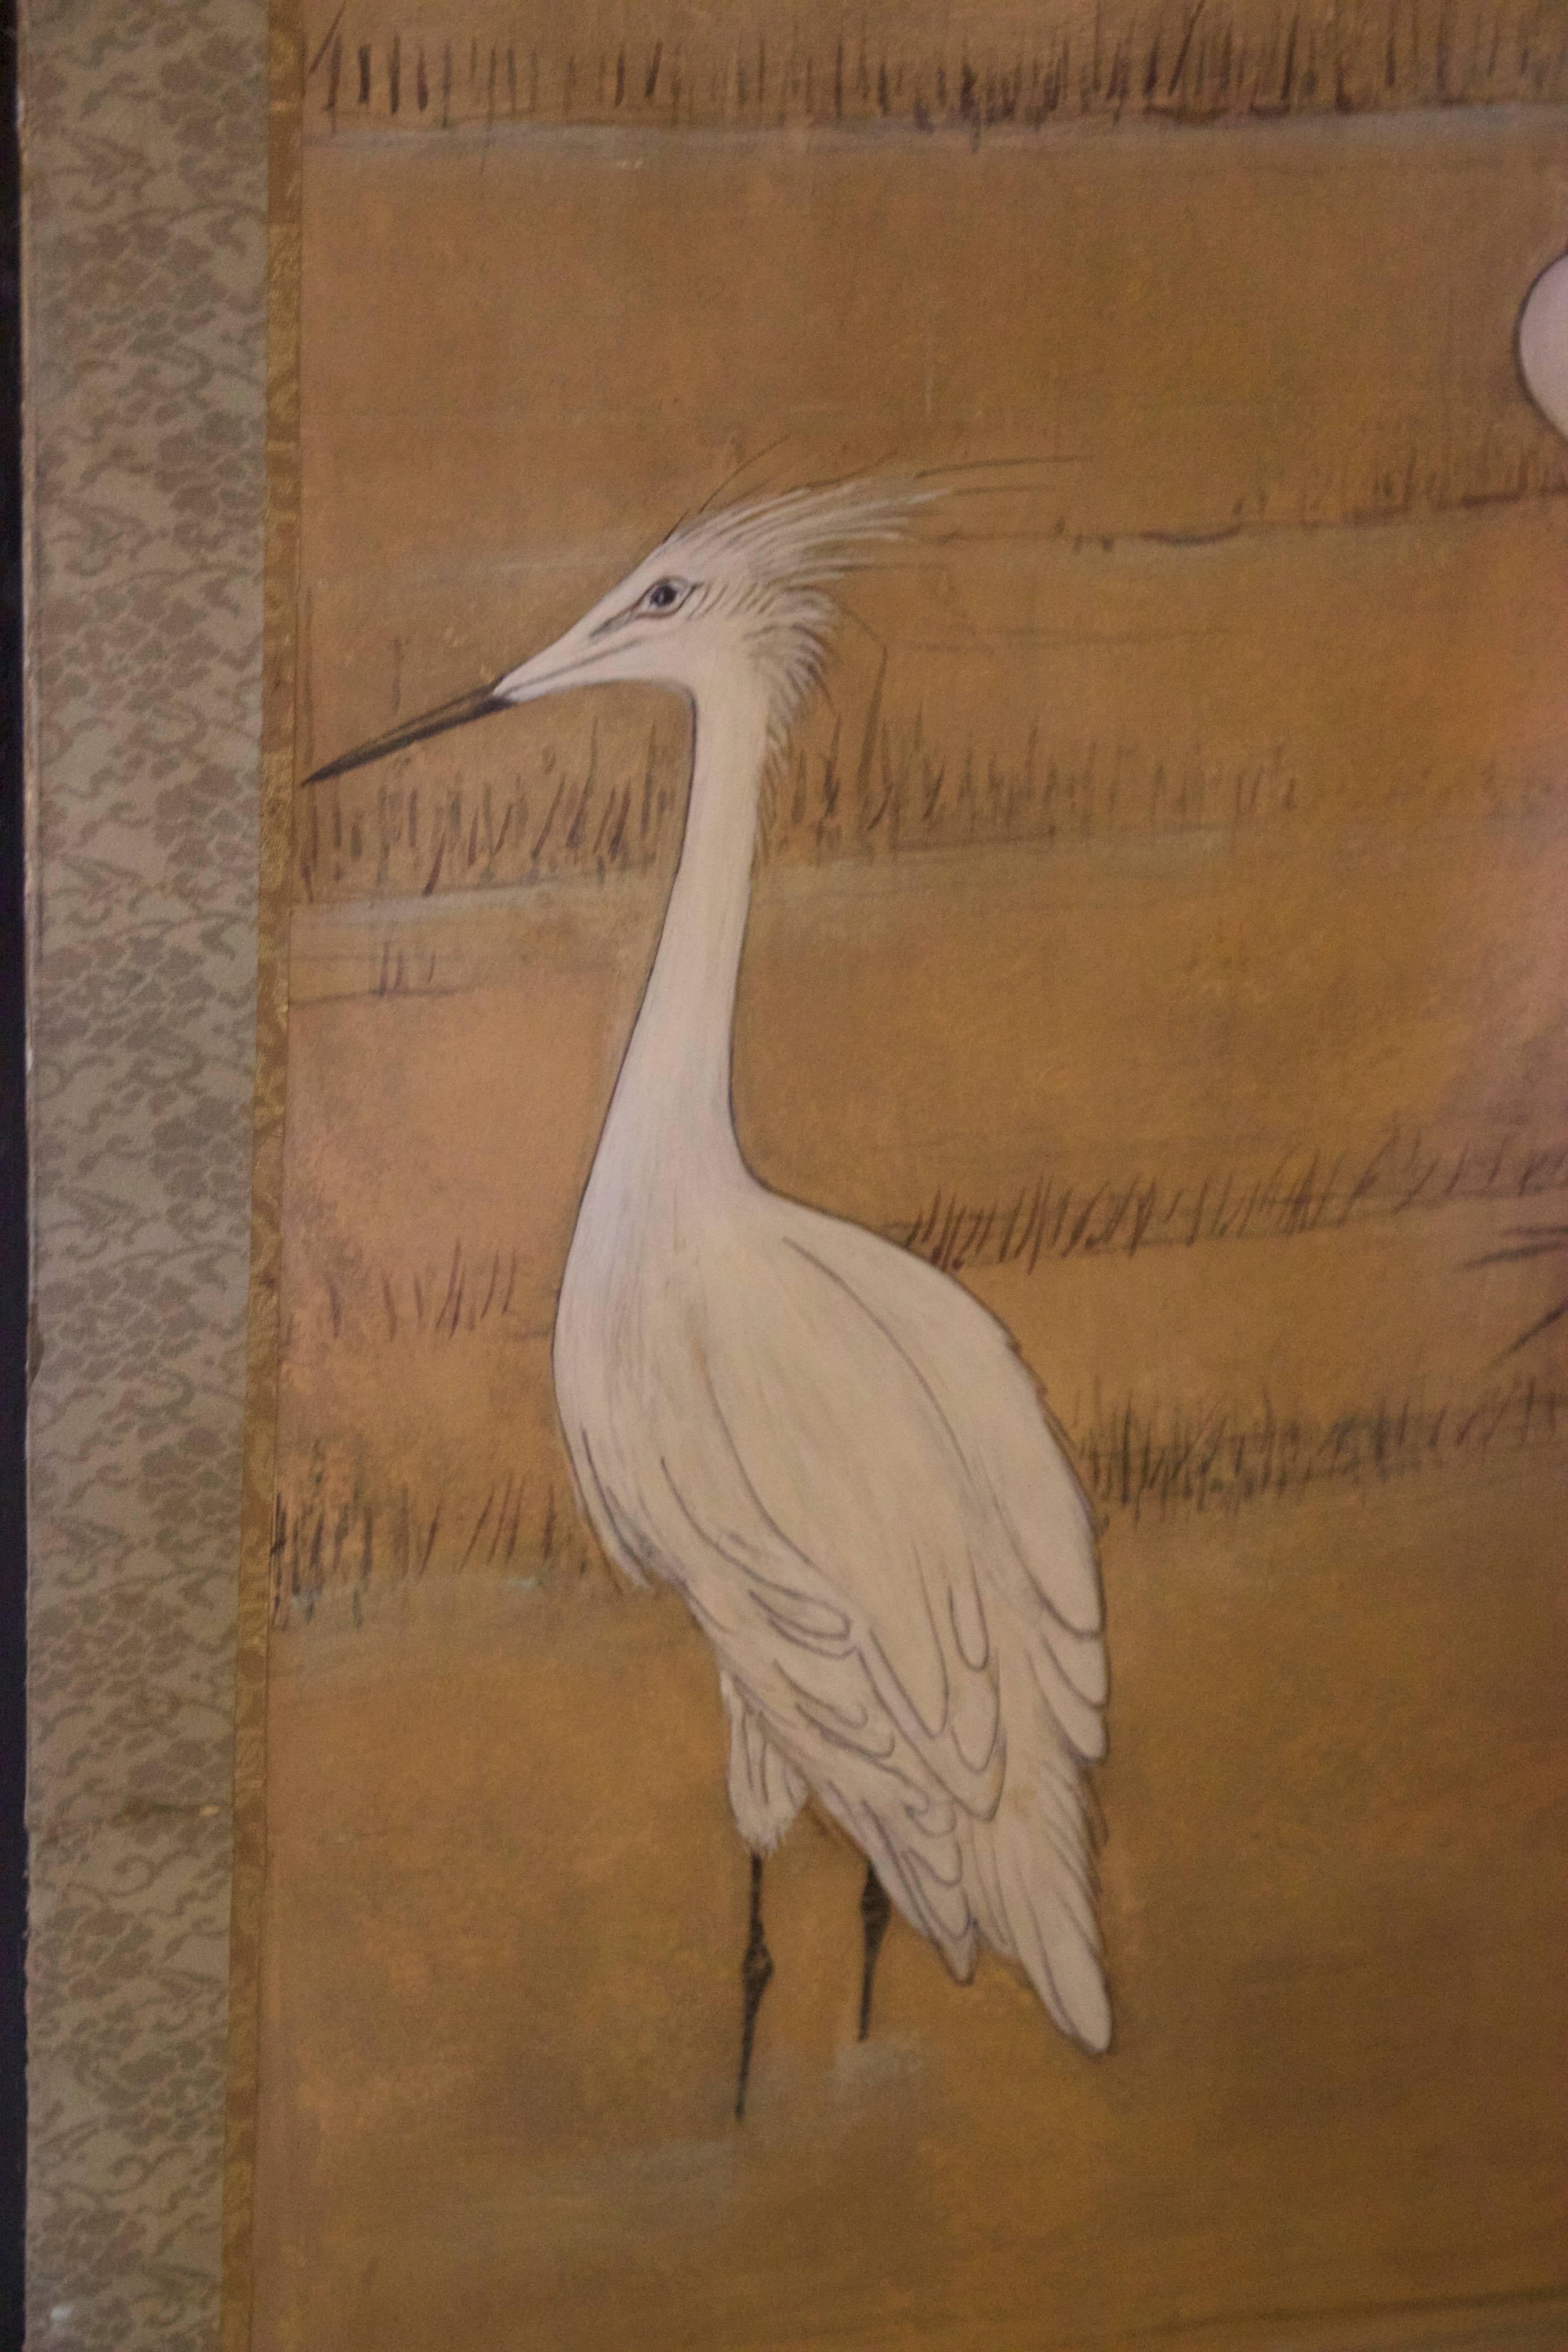 Four-Panel Screen Japan Decoration with Herons, Pencil and Gouache on Paper 1